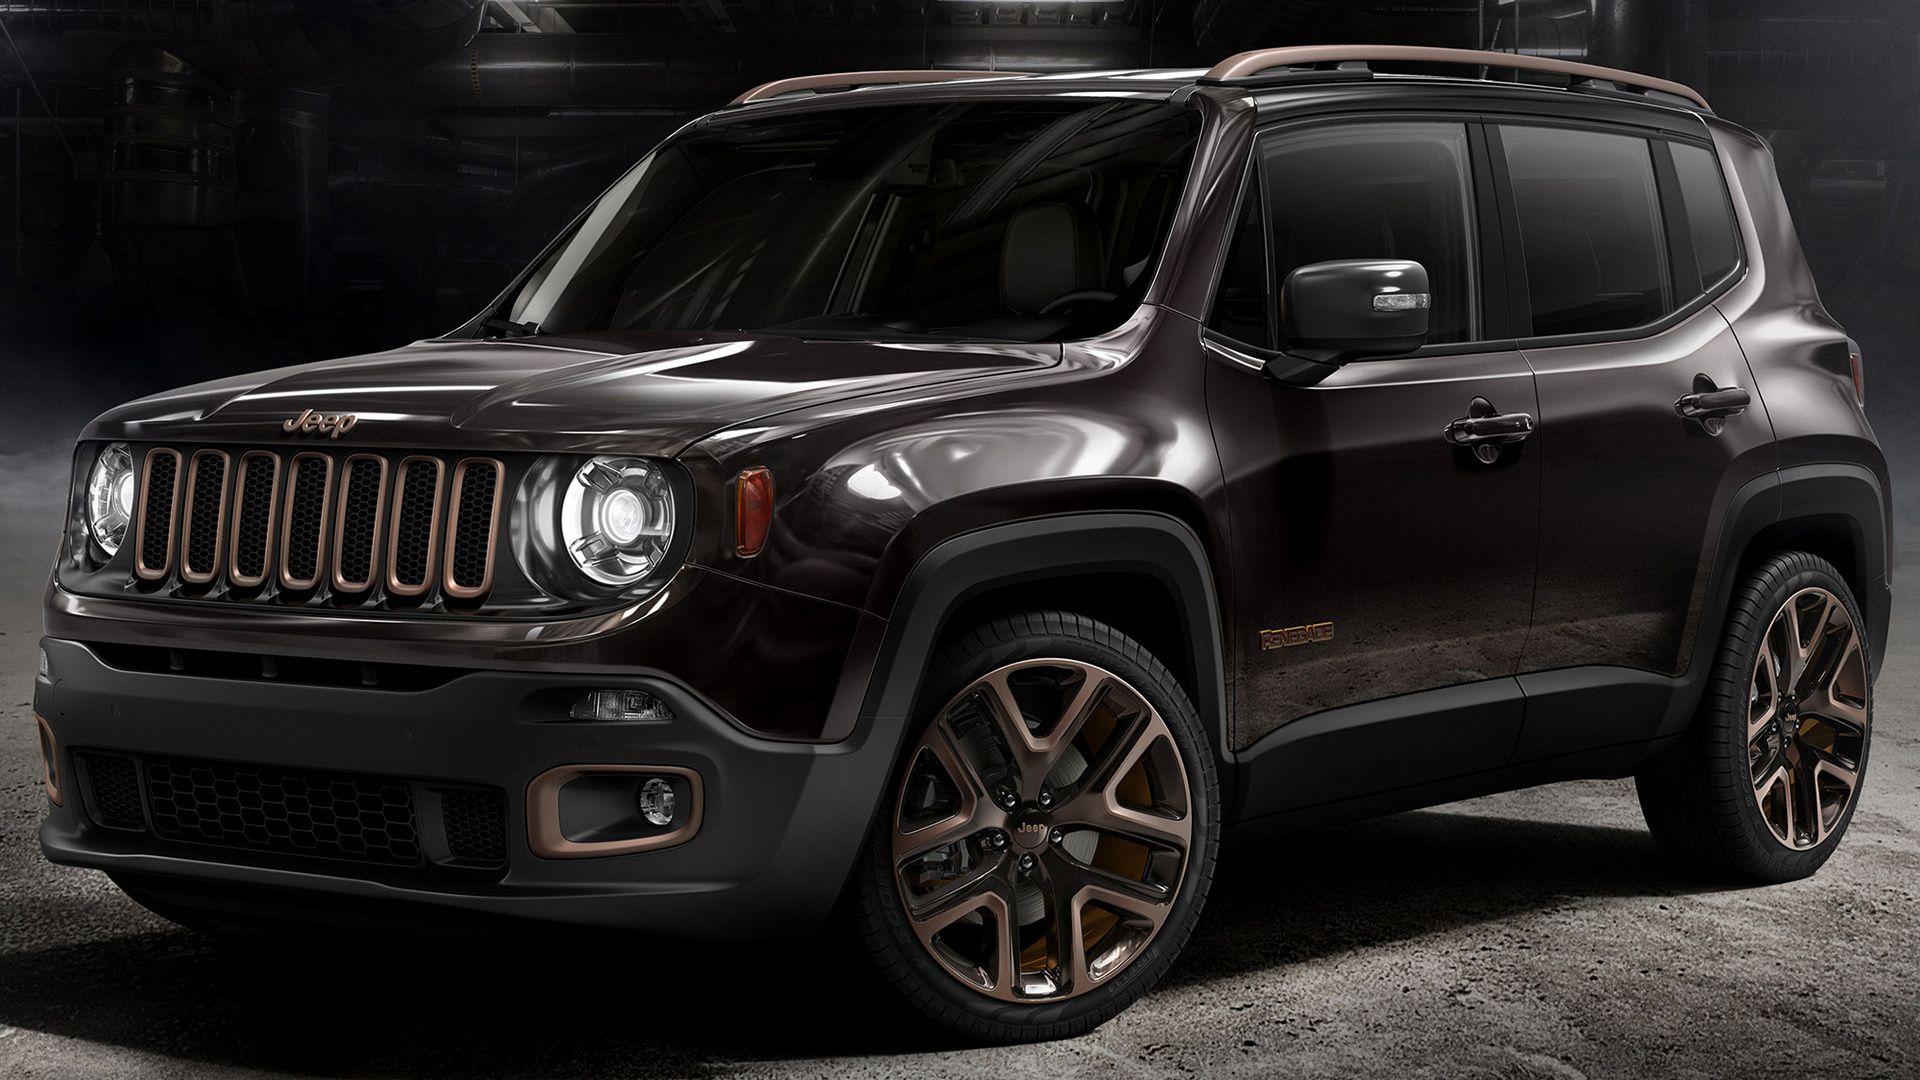 Jeep Renegade Zi You Xia Concept (2014) Wallpaper and HD Image